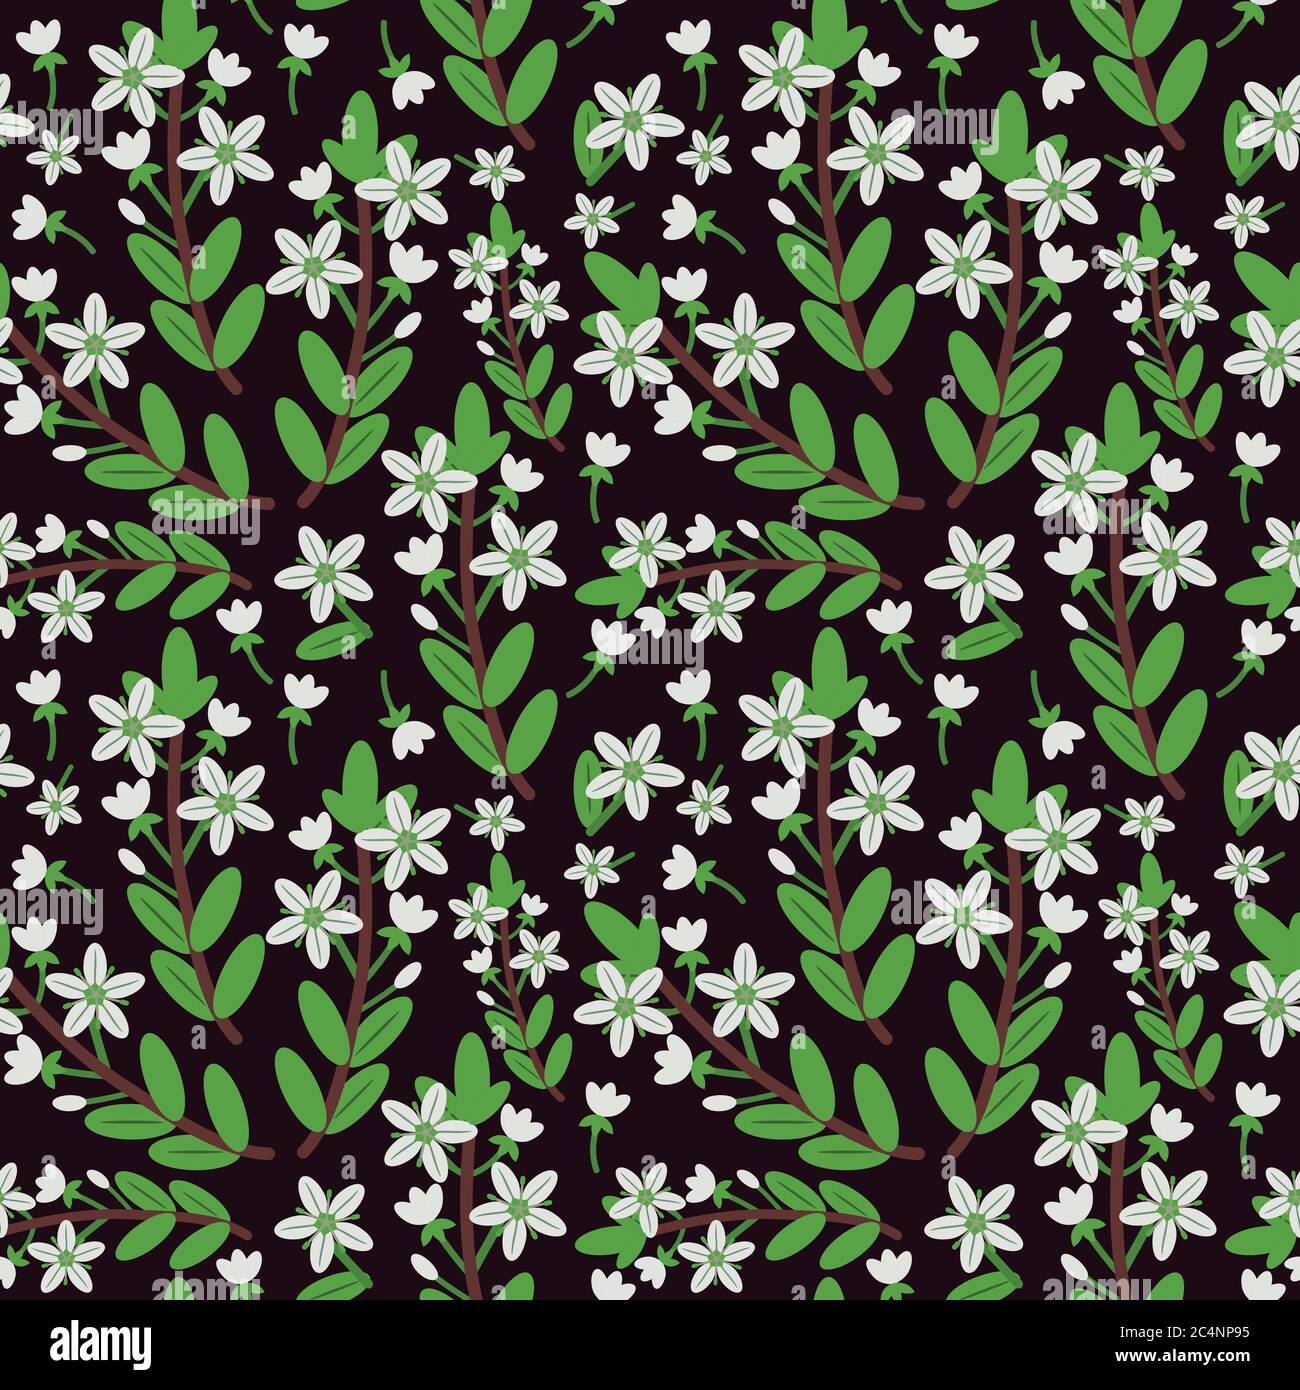 Seamless pattern with floral ornament Stock Vector